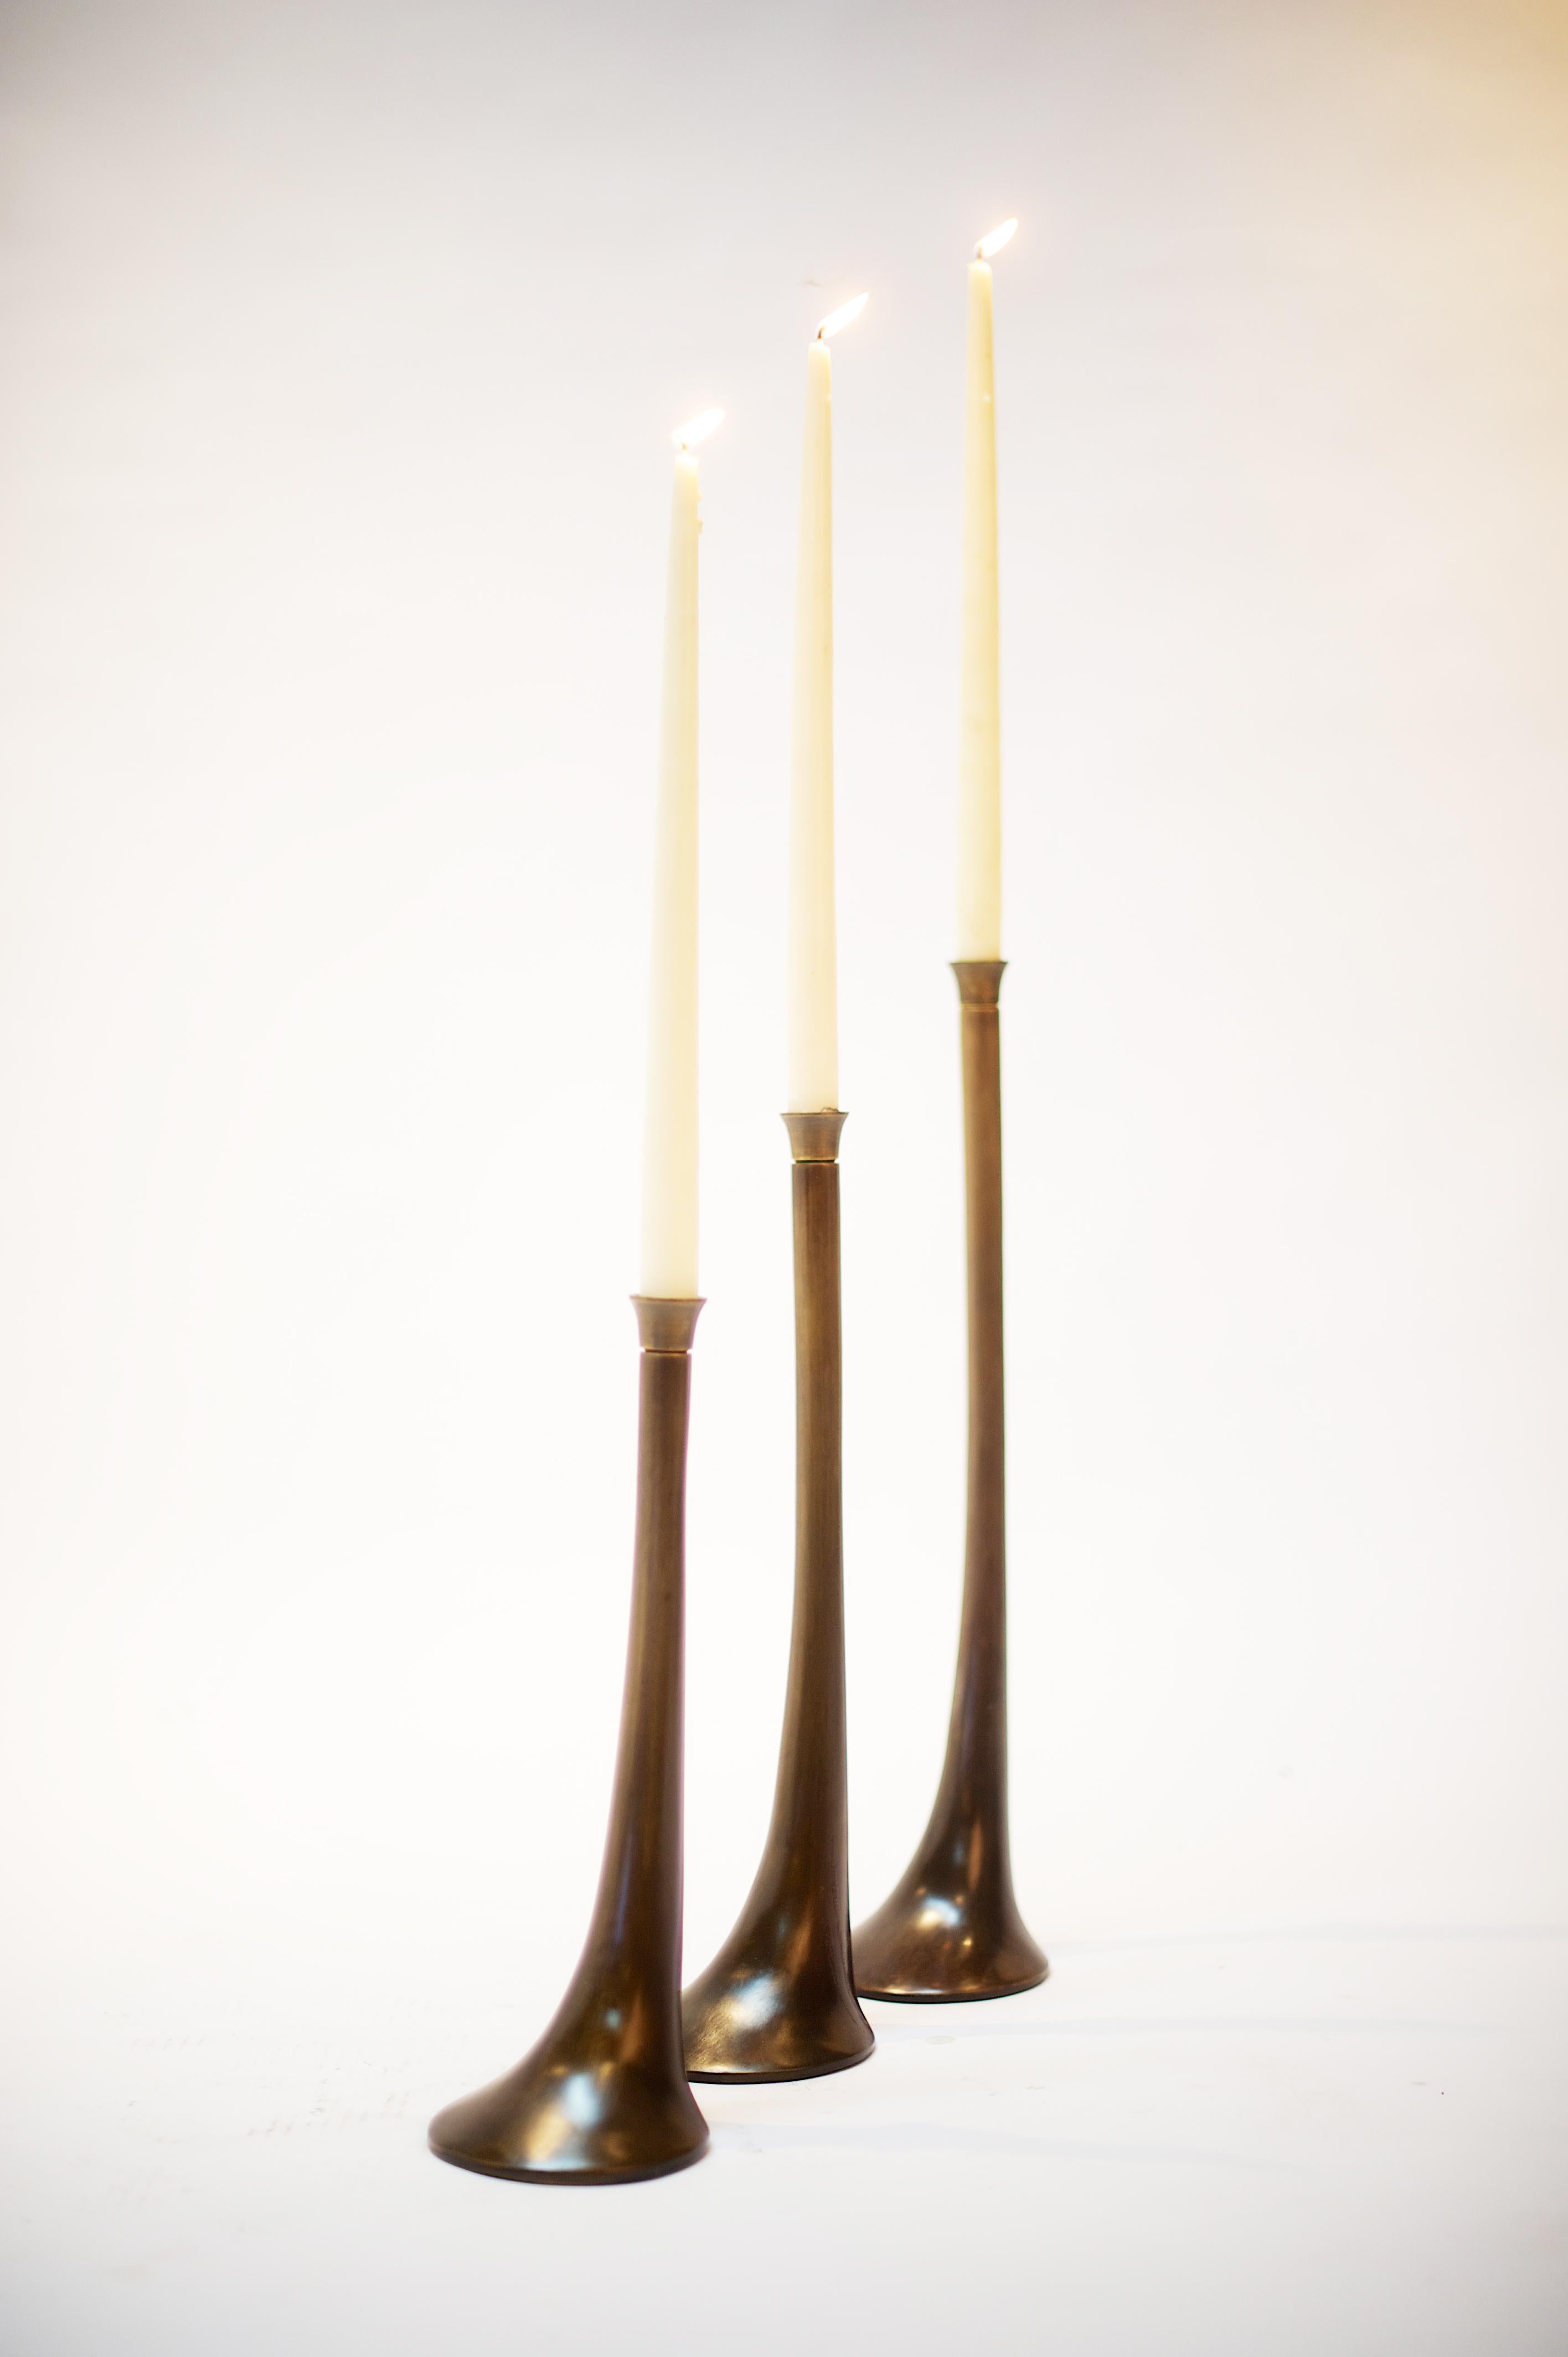 Set of Three Elm Candleholders by Elan Atelier. Available for preorder, 12 weeks production time, plus international shipping.

The set of 3 includes 1 small, 1 medium, and 1 large bronze candlestands.

The Elm Candleholders are cast using the lost